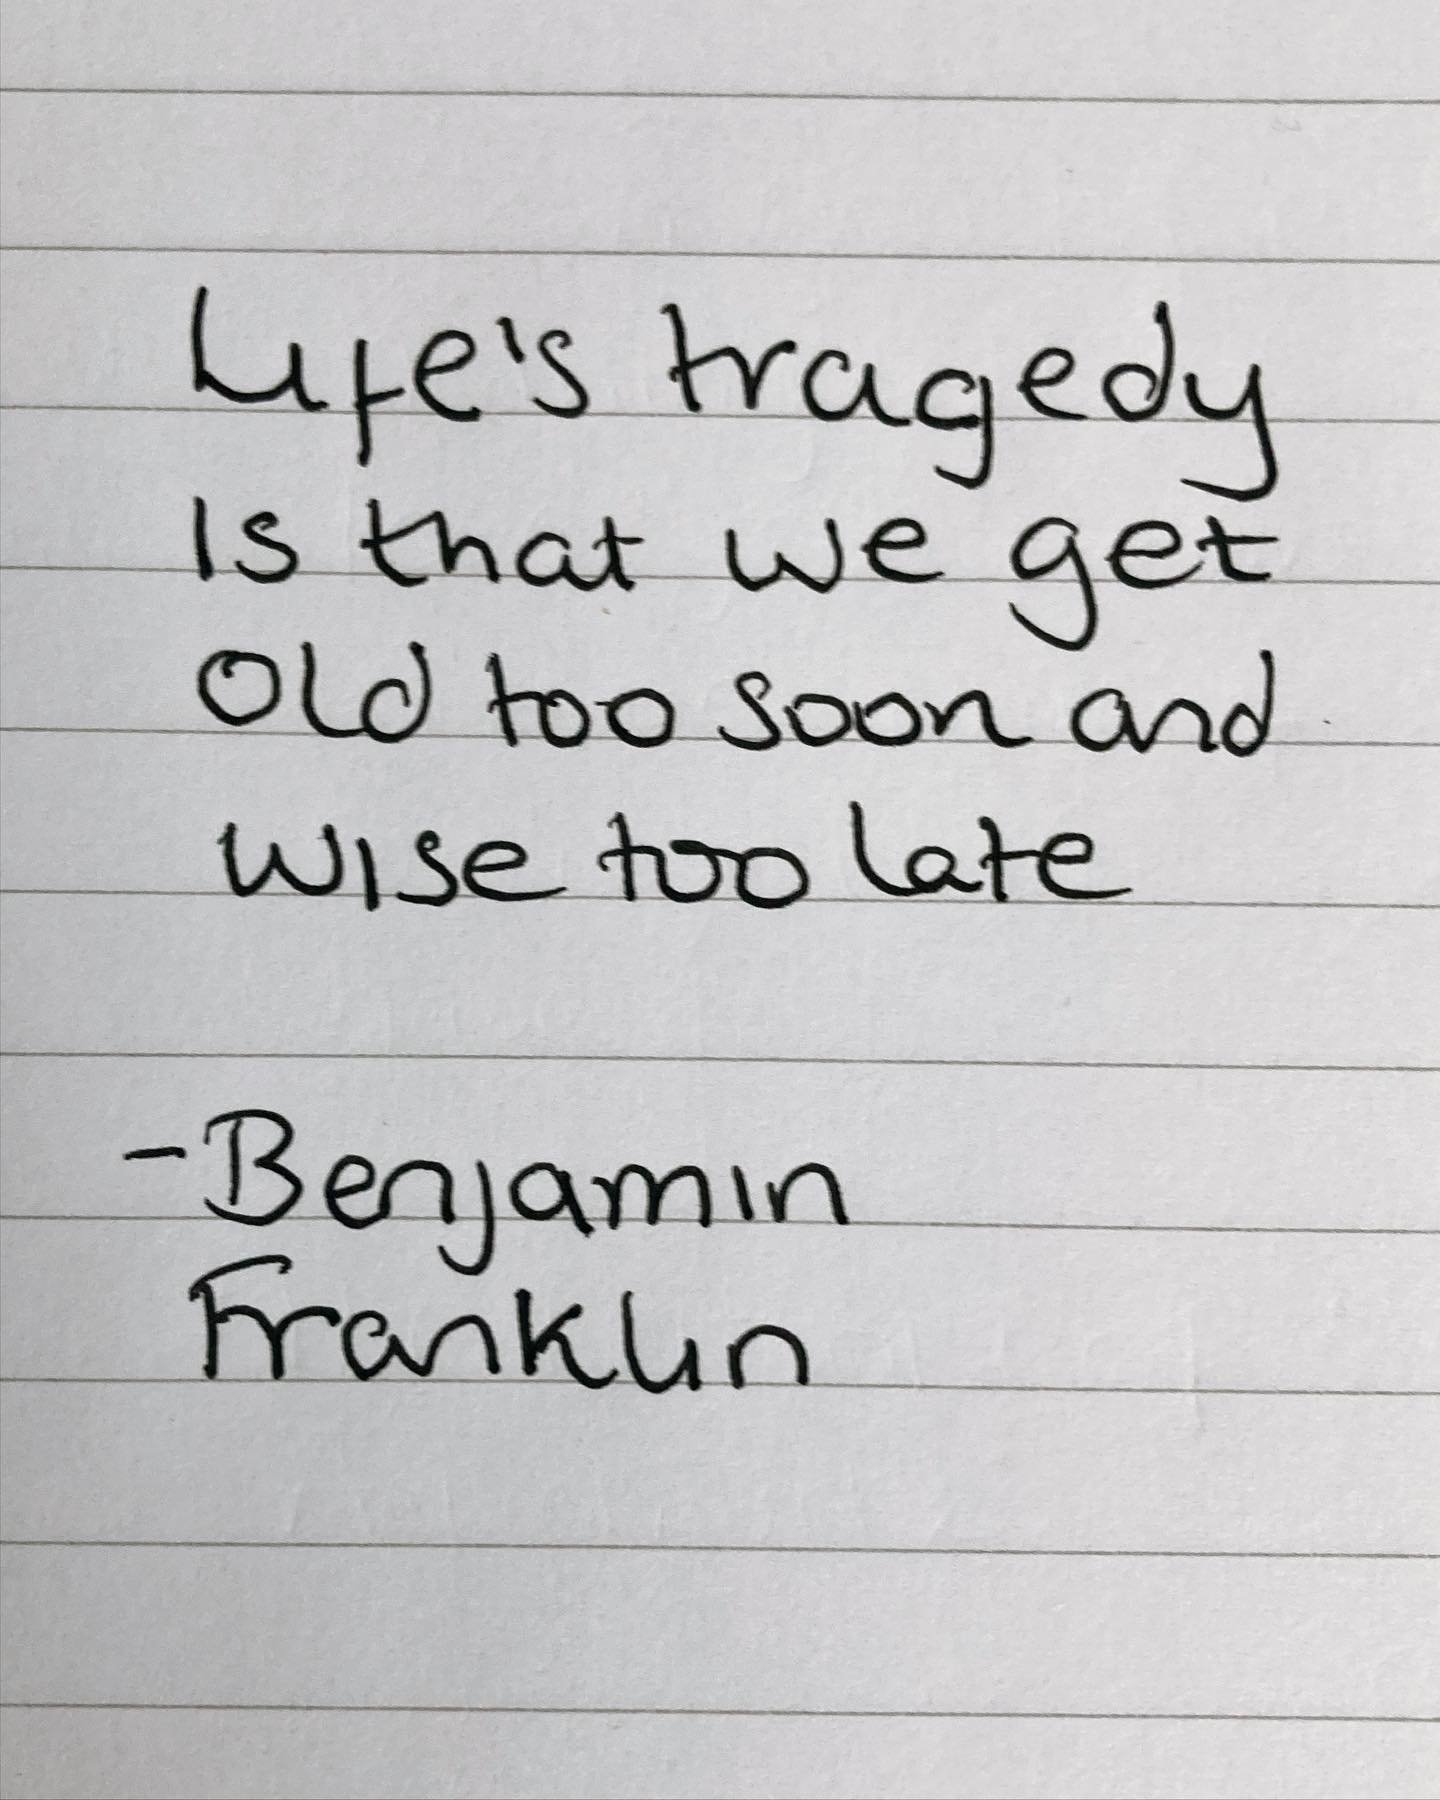 &ldquo;Life&rsquo;s tragedy is that we get old too soon and wise too late&rdquo; - Benjamin Franklin

I wonder if part of therapy is learning about ourselves so we become wiser? 

#benjaminfranklin #quotes #psychotherapy #wisewords #process #selfdisc